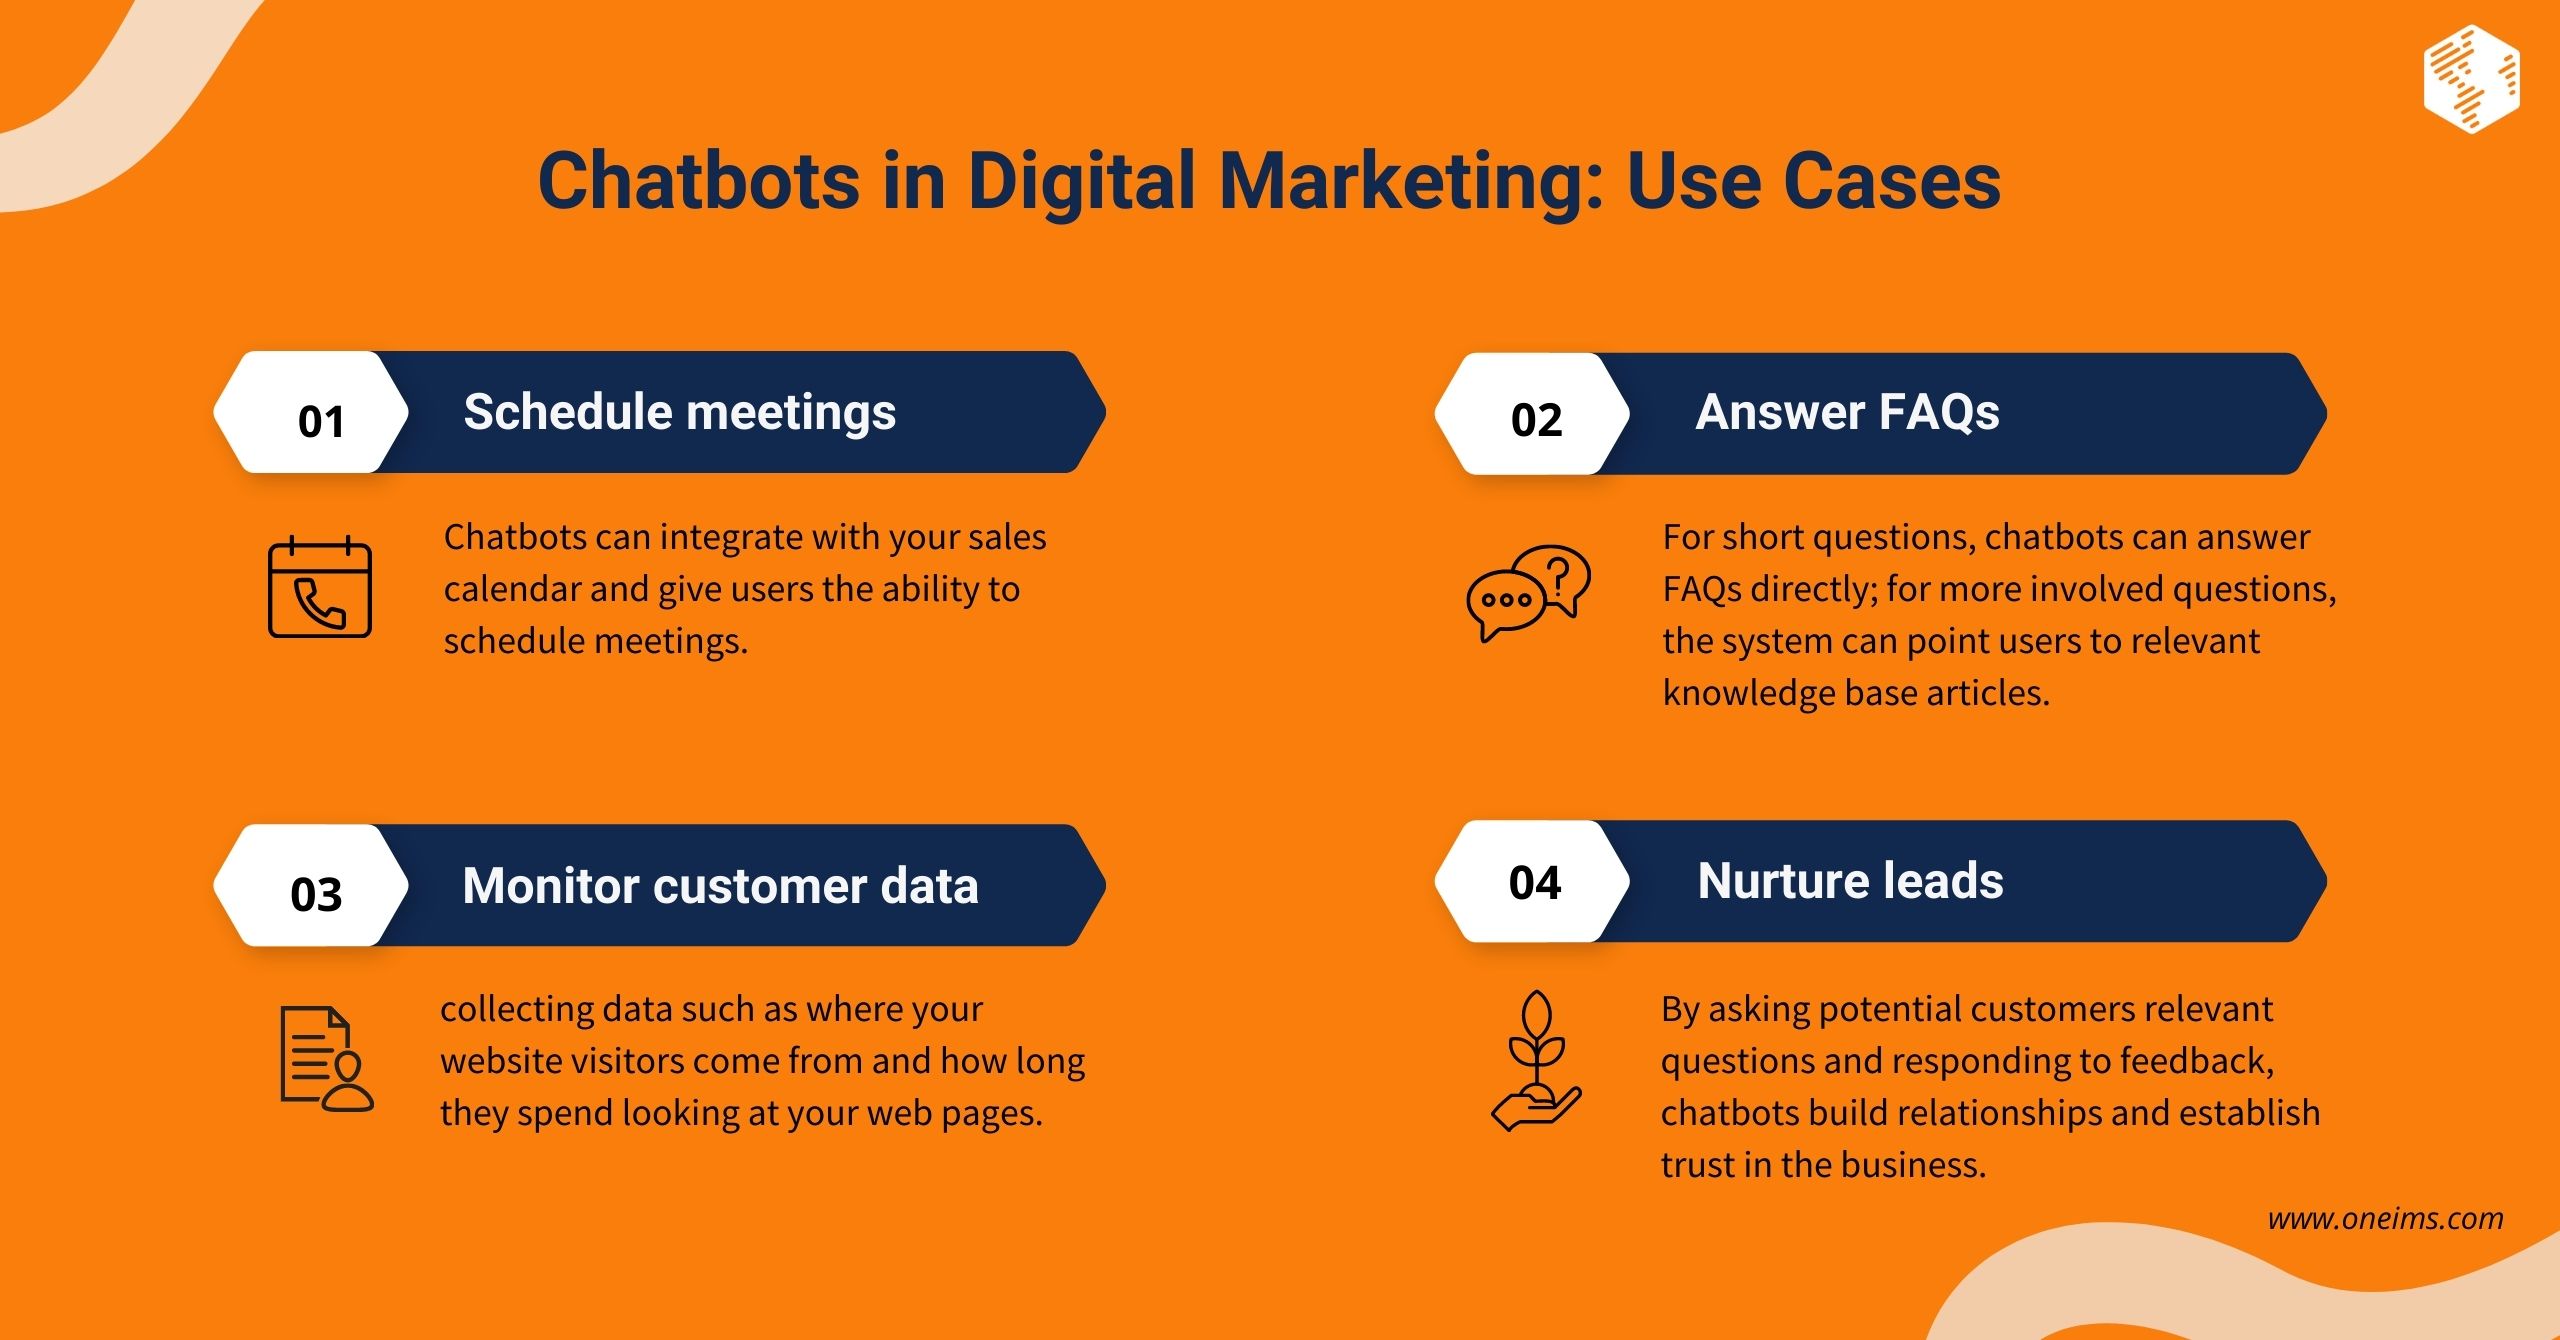 Use Cases of Chatbots in Digital Marketing